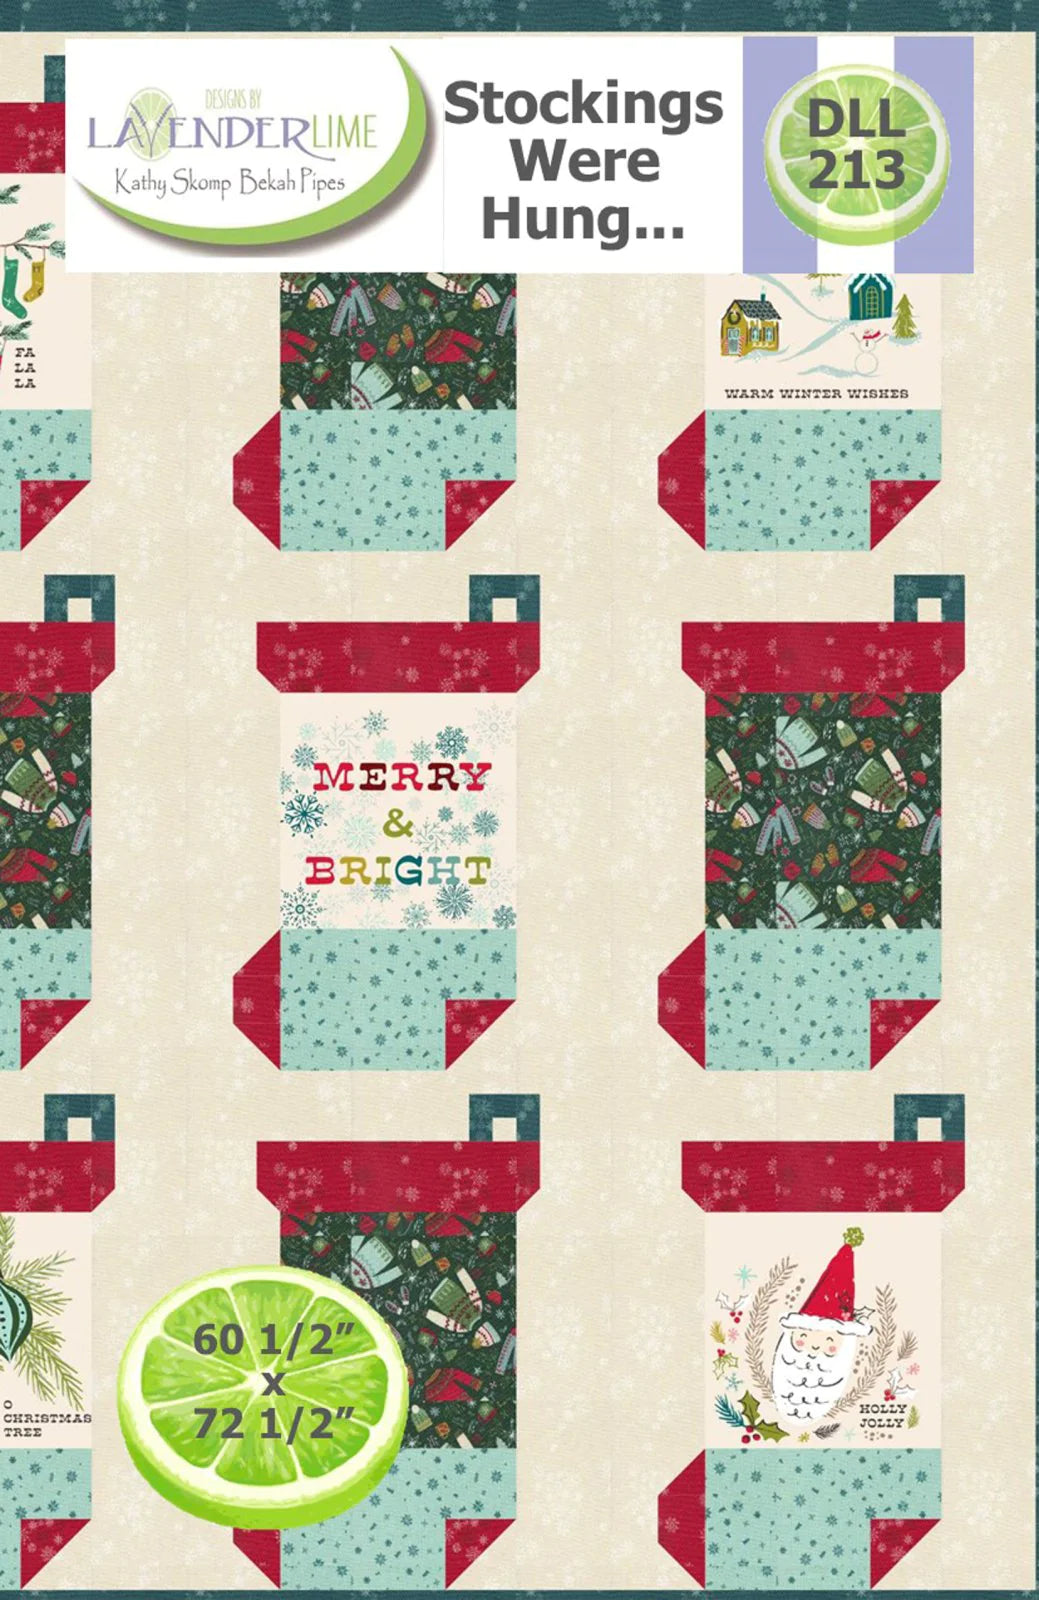 Stockings were Hung Downloadable Pattern by Lavender Lime Quilting